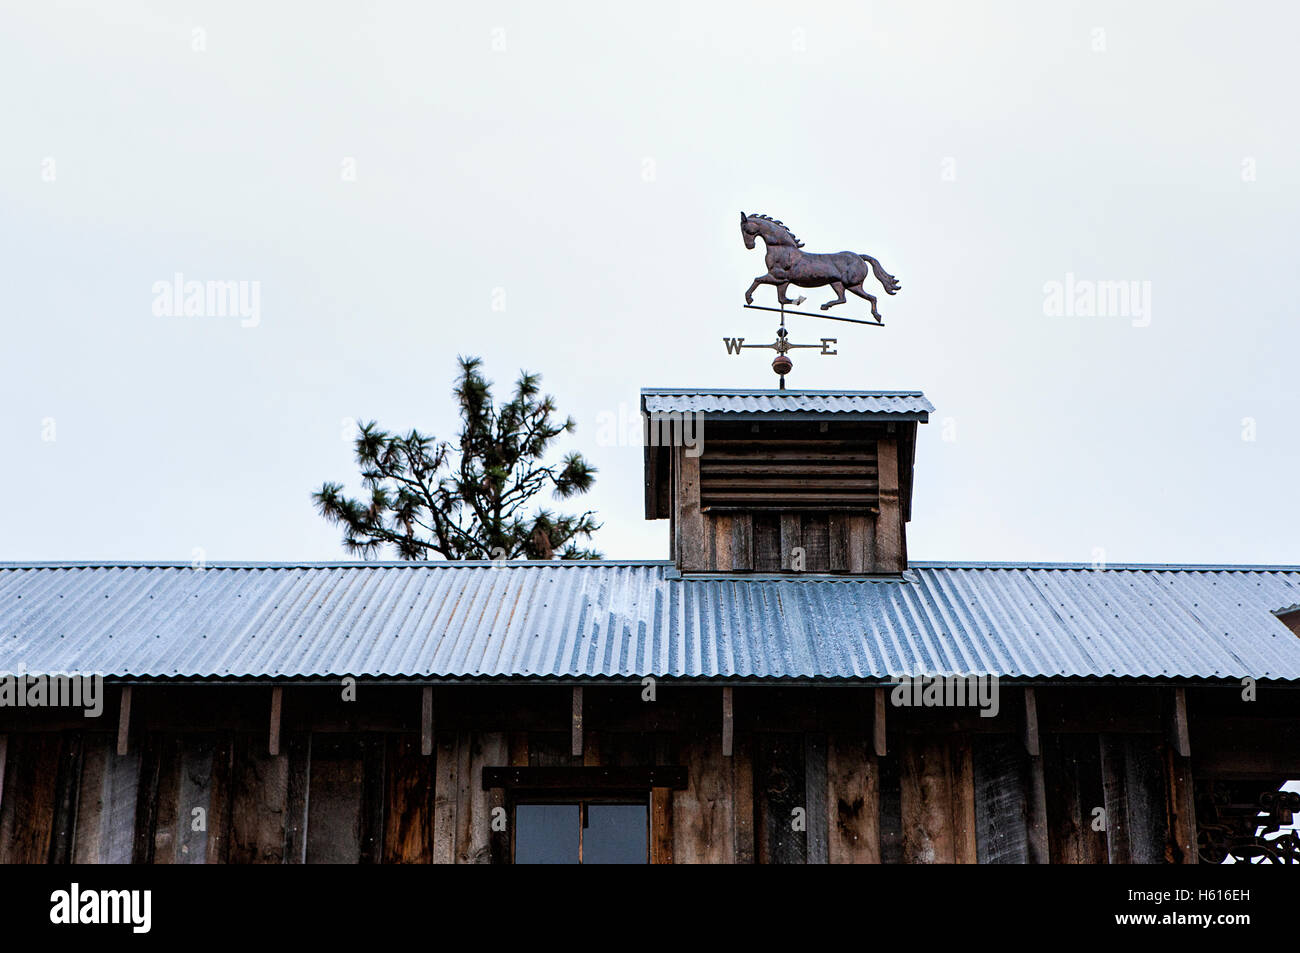 A horse weather vane sitting on top of an old building. Stock Photo